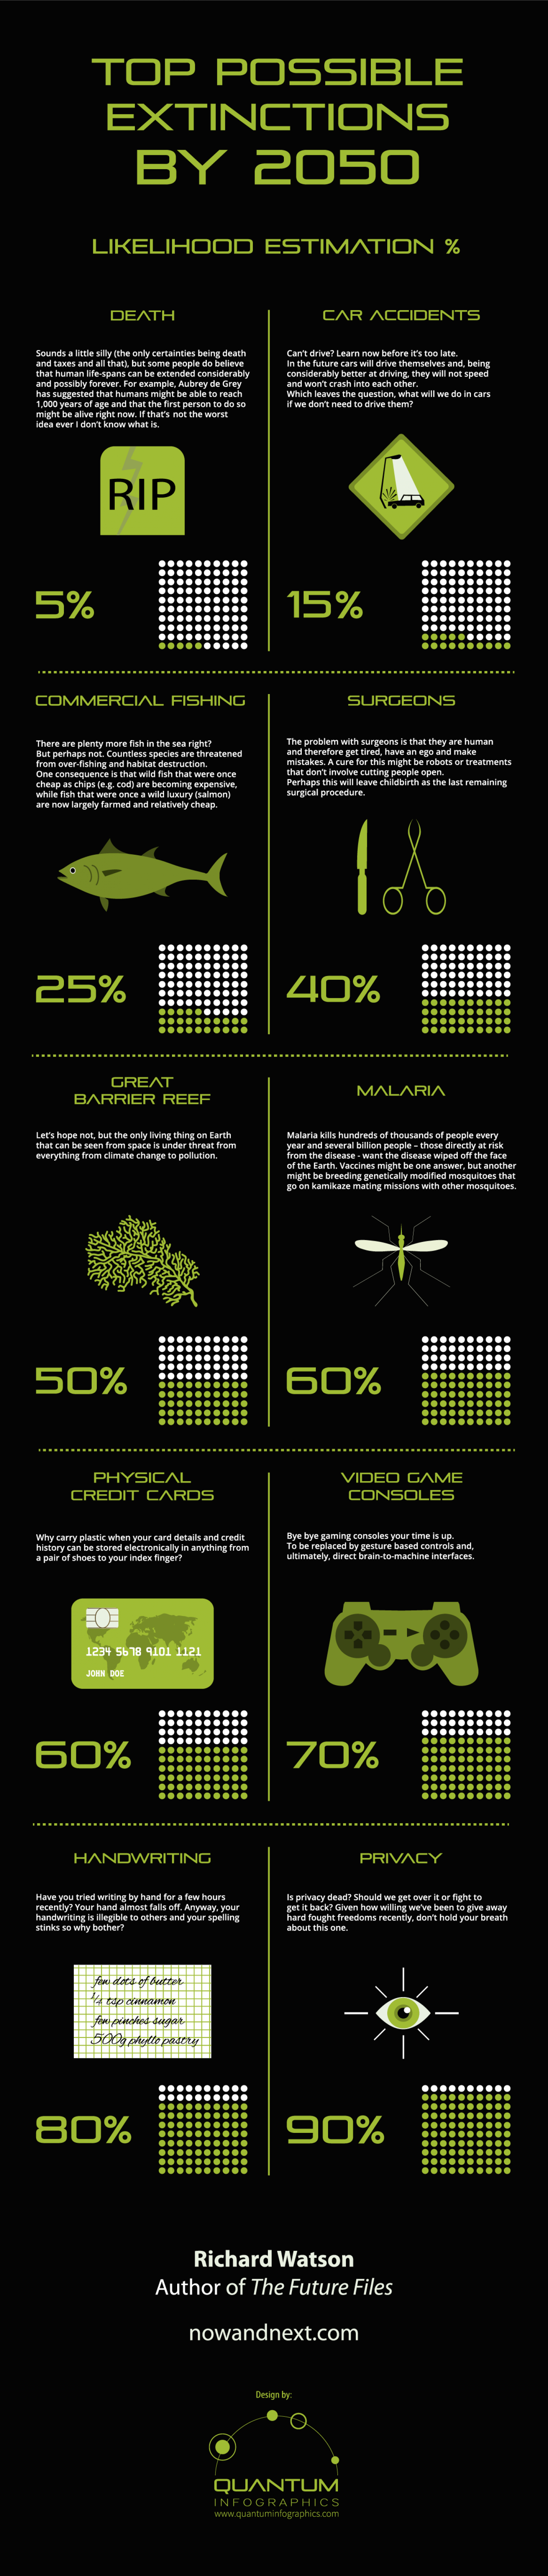 Top Possible Extinctions by 2050 Infographic